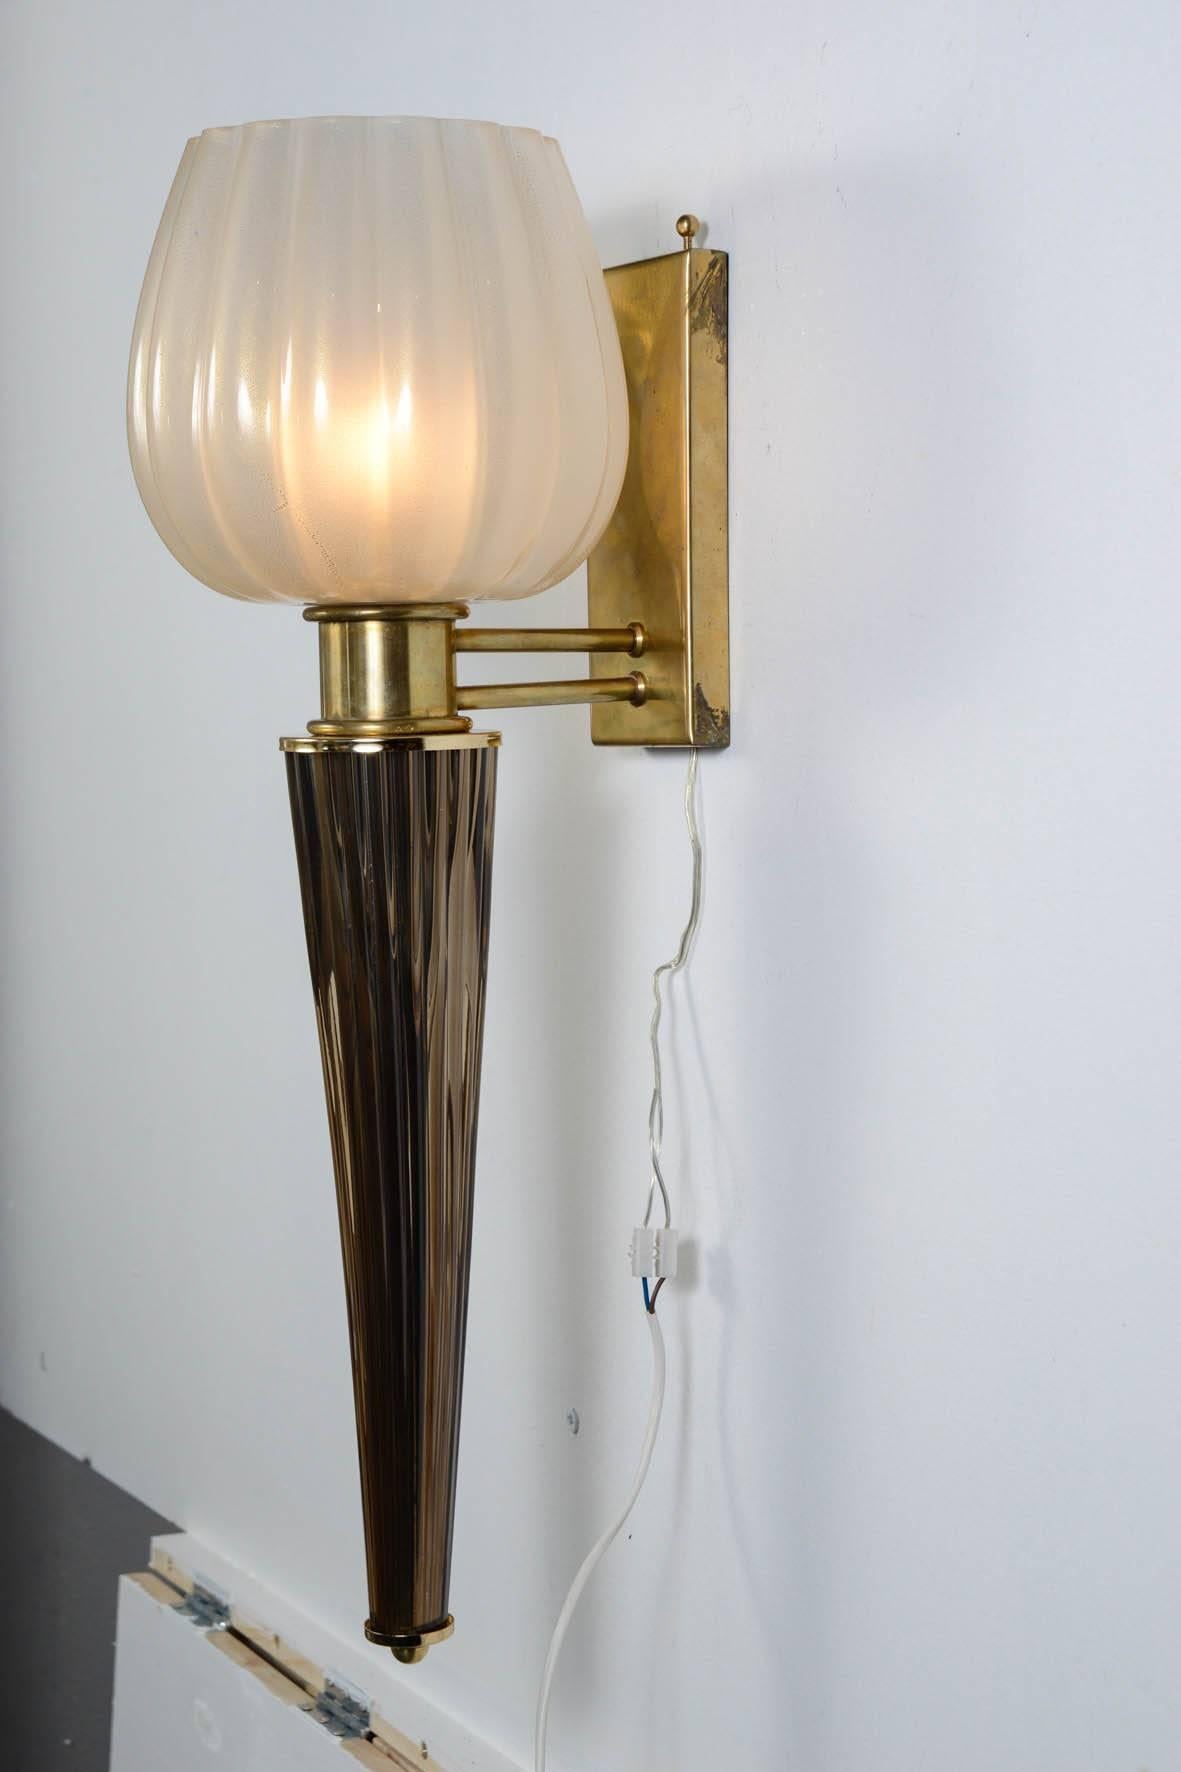 Pair of Murano glass sconces
A second pair is available.